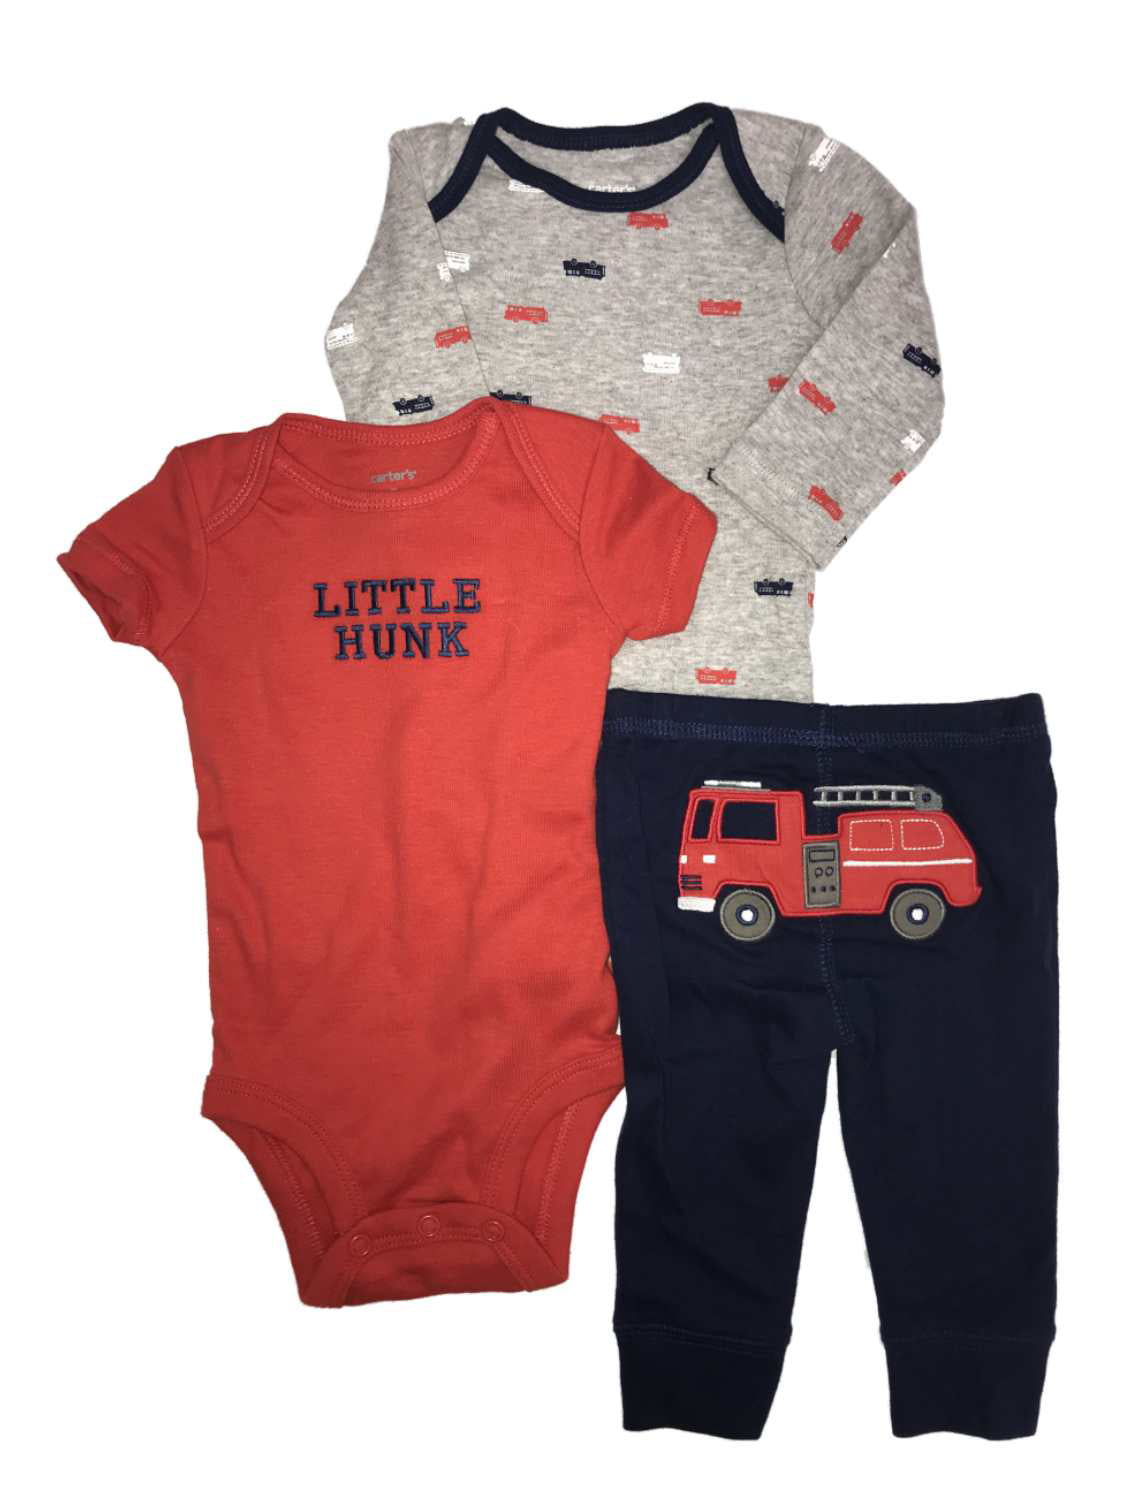 New Carter's Boys 5 Pack Bodysuits Tops Planes Cars Fire Truck NB 3 9 12 18 24m 